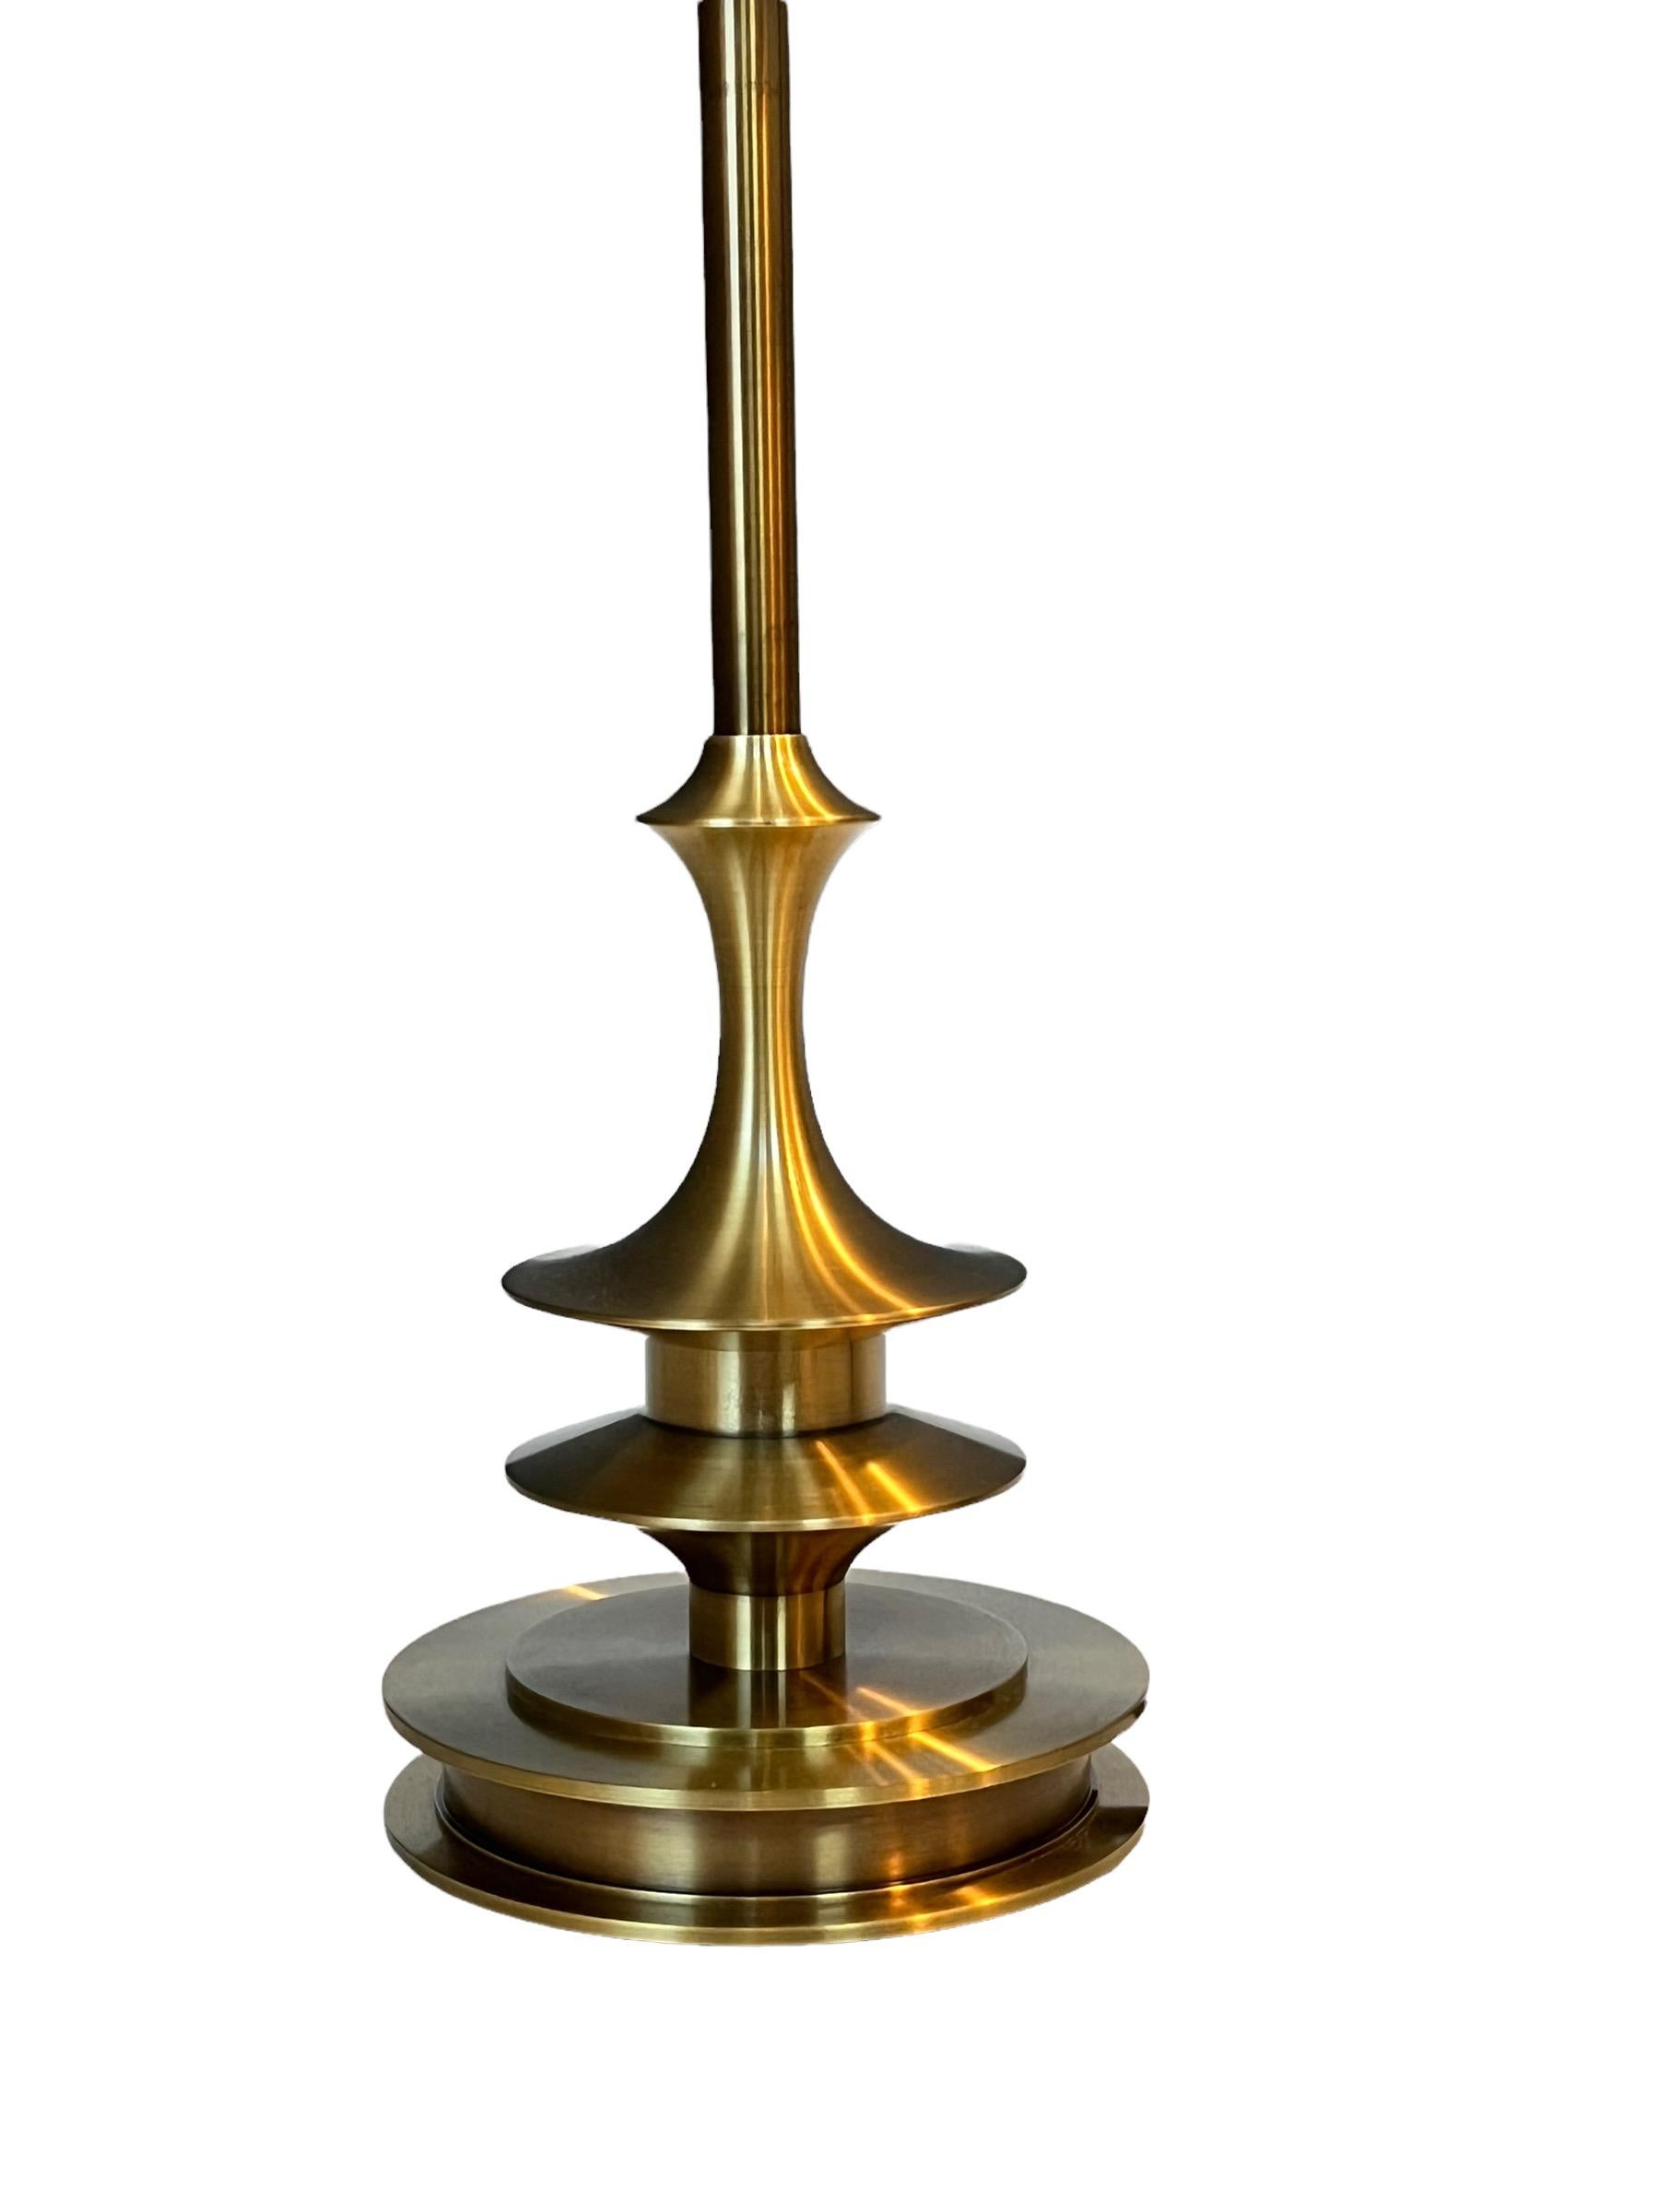 Contemporary Pair of Side Table Lamps, Solid Brass by Designer Solis Betancourt 3